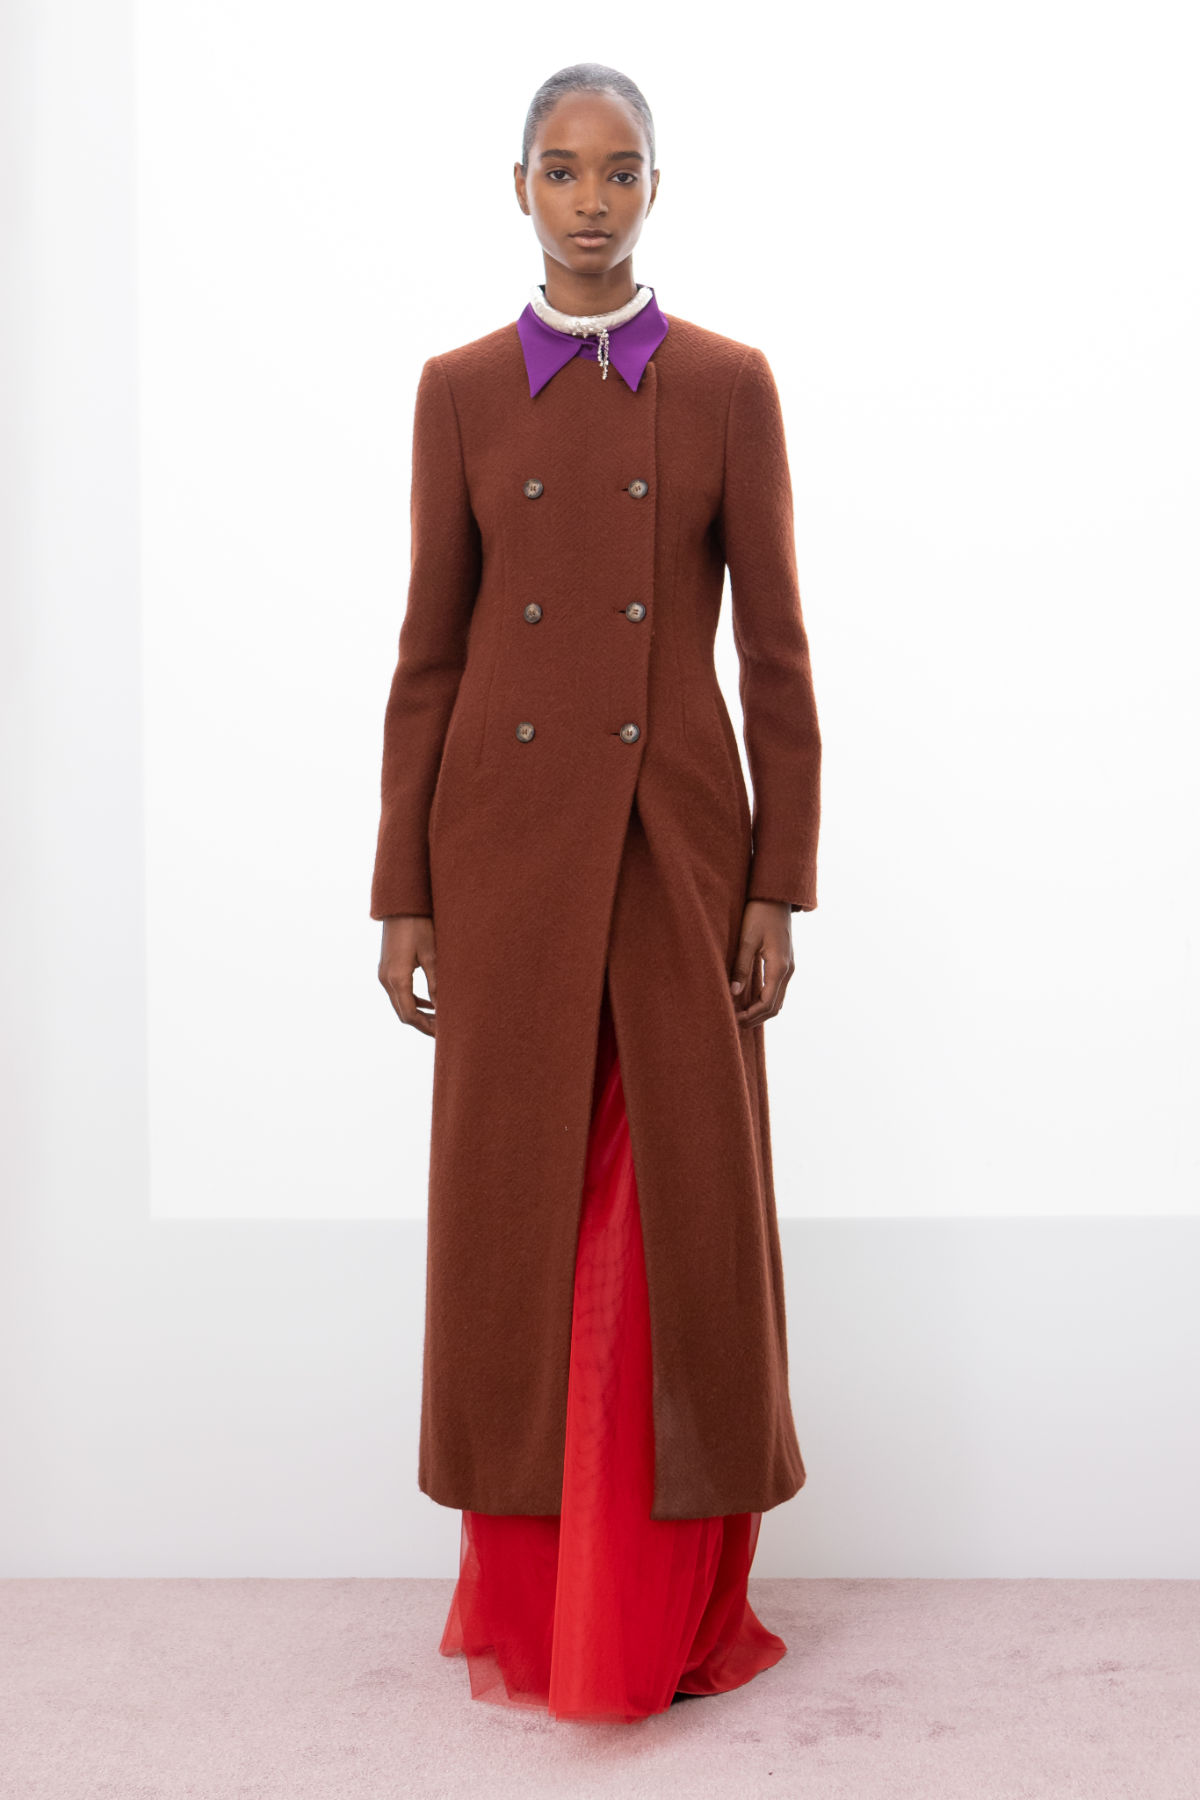 Rochas Presents Its New Autumn-Winter 2023 Collection